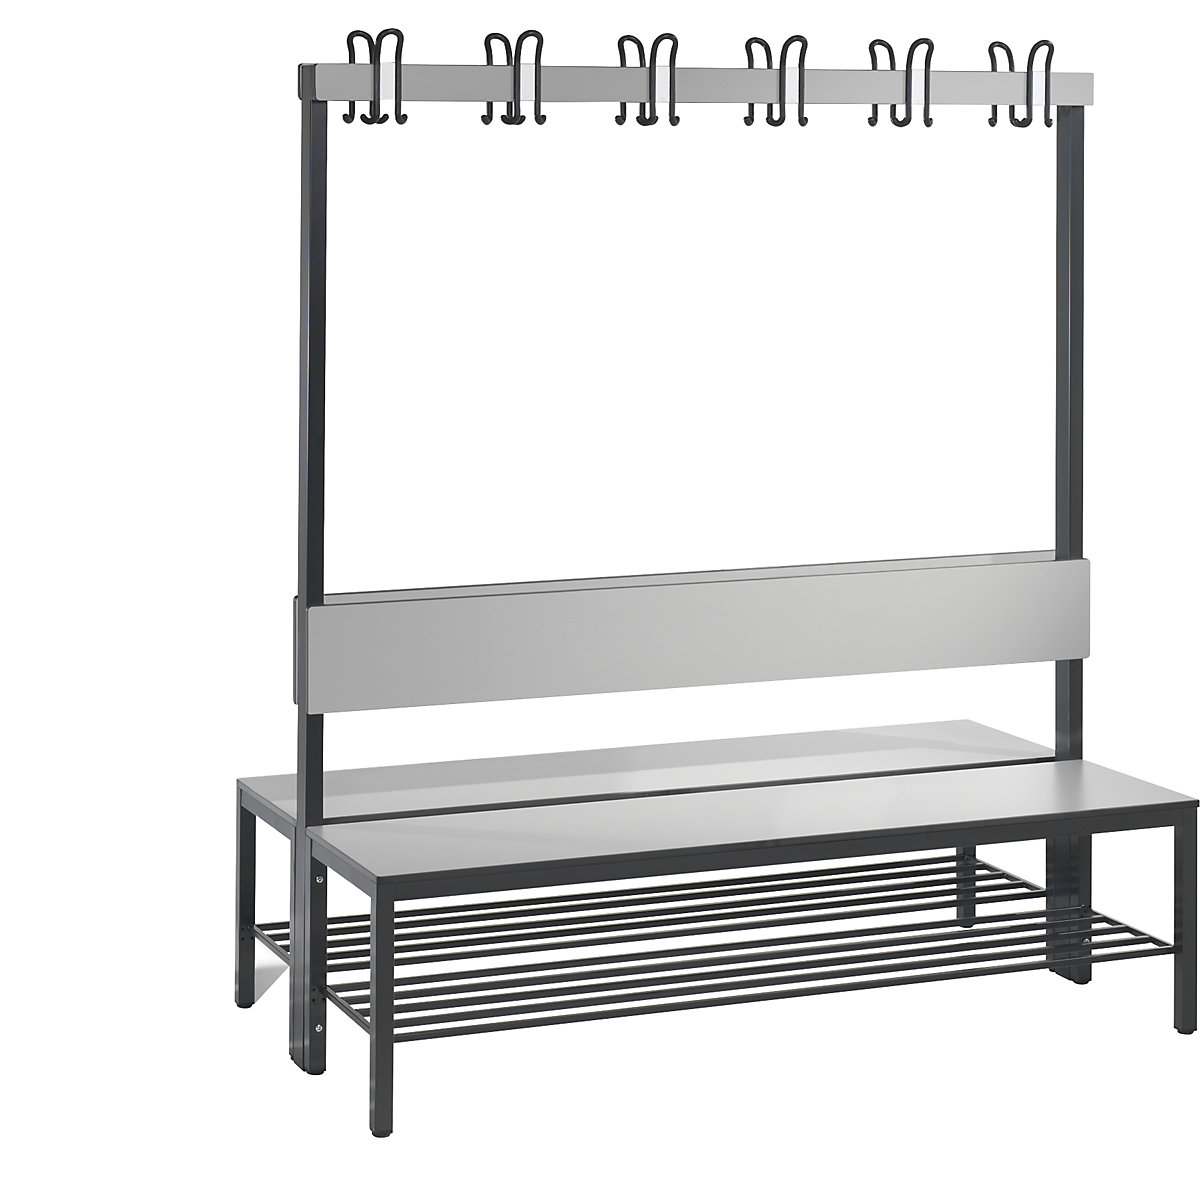 BASIC PLUS cloakroom bench, double sided – C+P, seat HPL, hook rail, shoe rack, length 1500 mm, silver grey-6